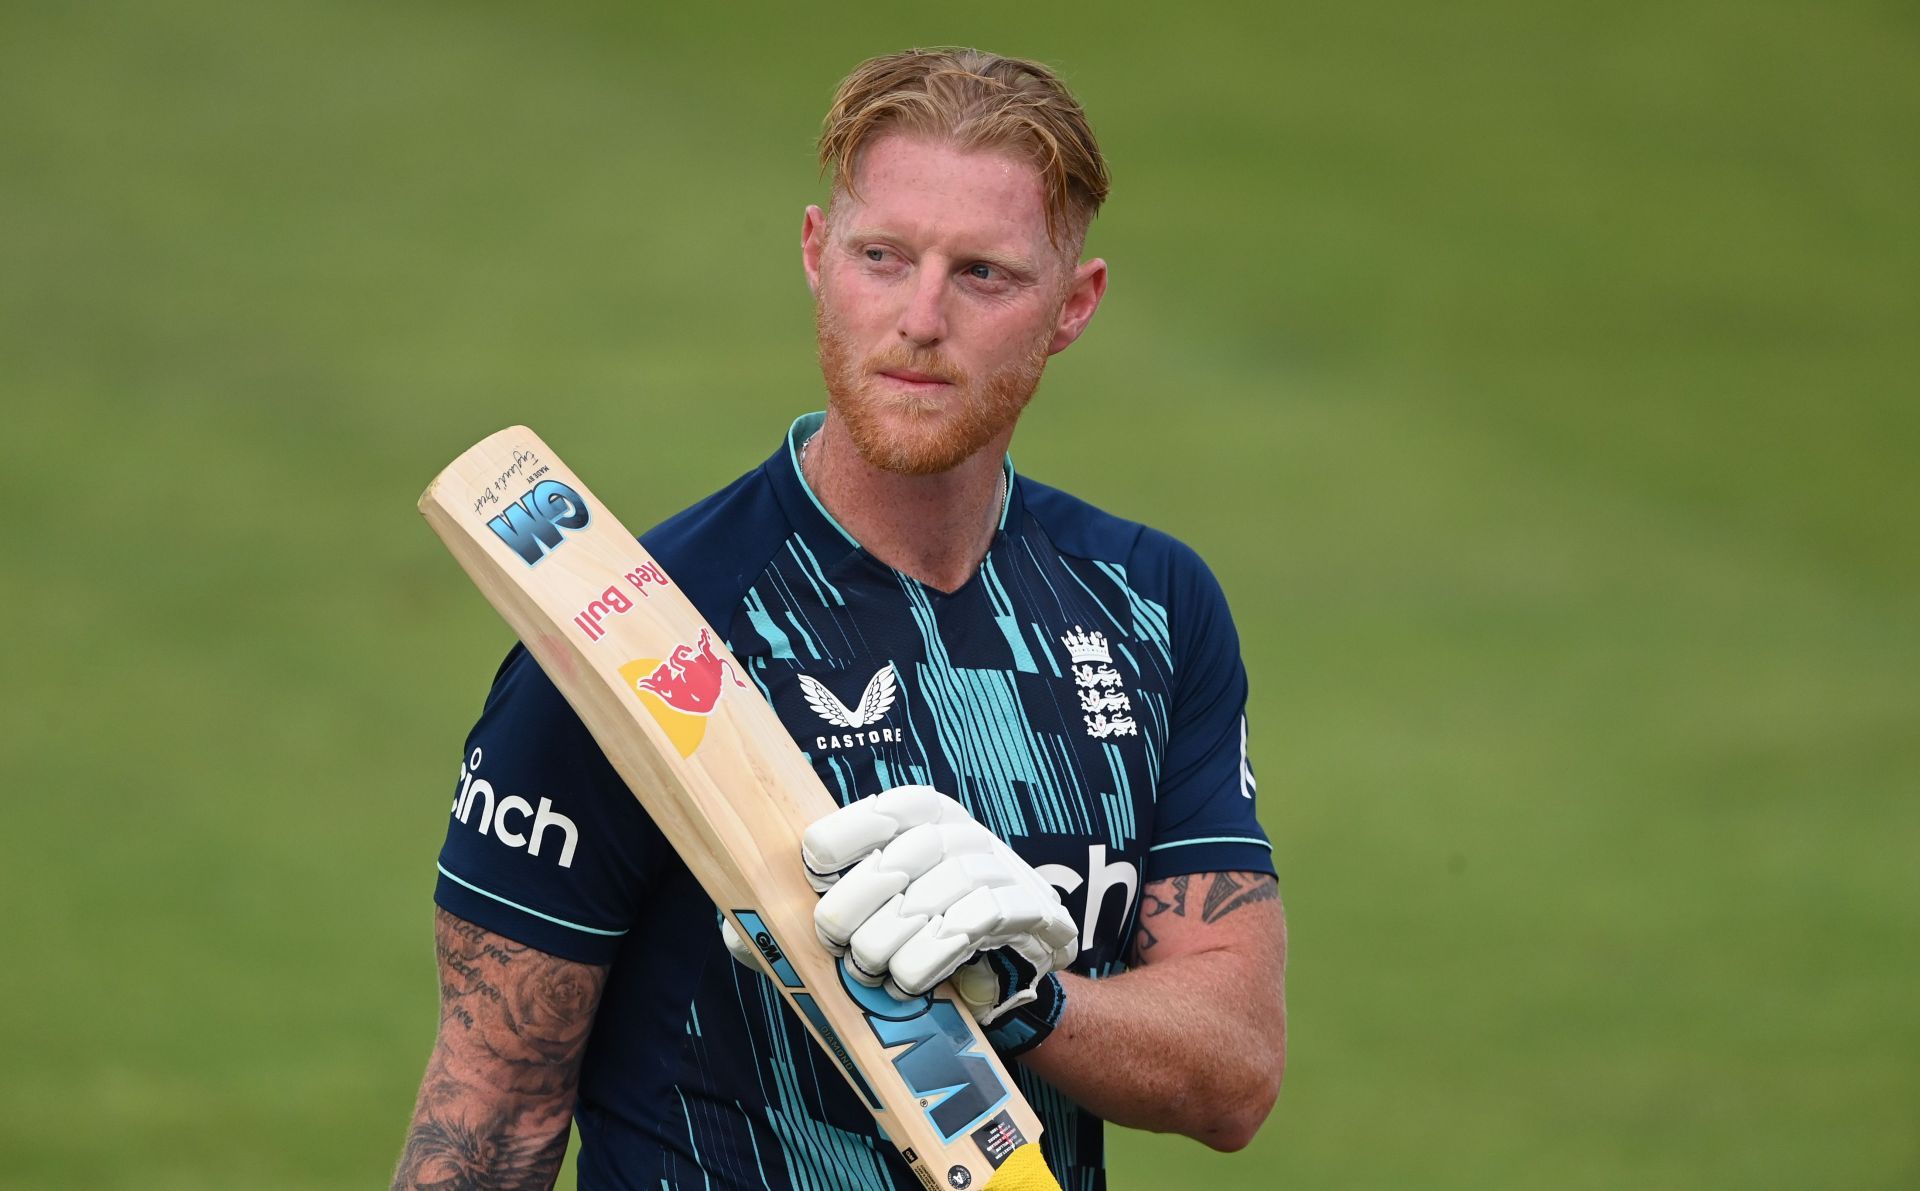 Ben Stokes retired from ODI cricket after the first game against South Africa